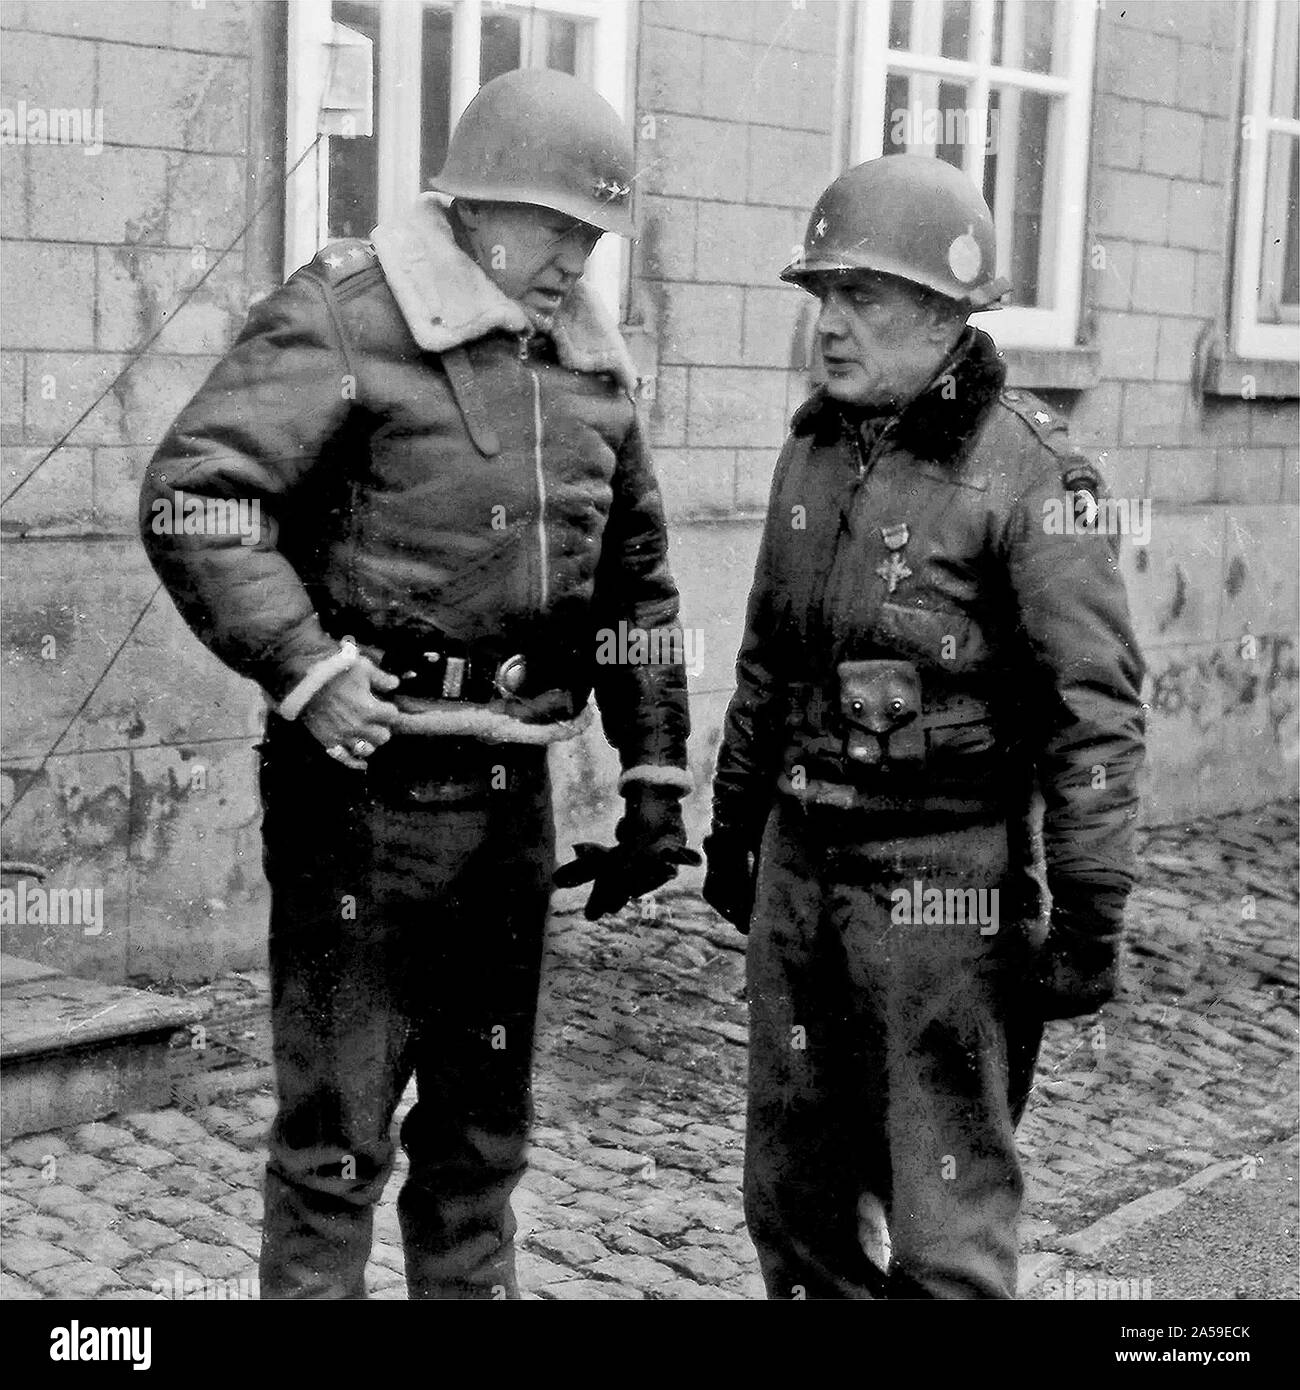 Lt. Gen. George S. Patton speaks to Brig. Gen. Anthony McAuliffe, January 1945. Patton led the Third Army in a sweep across France and an instrumental role in defeating the German counter offensive in the Ardennes. Patton commanded the Third Army from 1944 to 1945. Third Army’s unit motto “Patton’s Own – Third, Always First” is in honor of Patton. Stock Photo